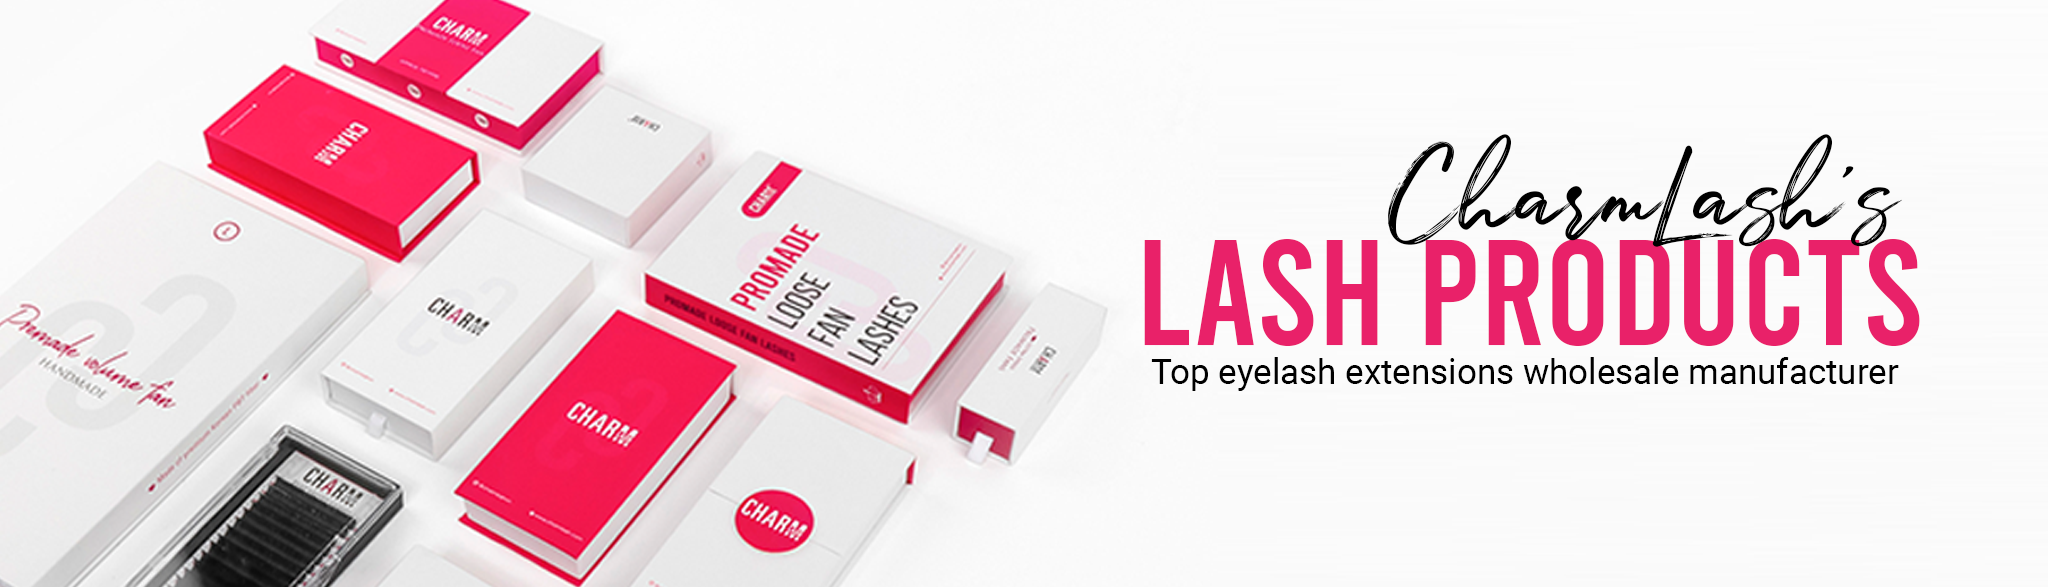 CharmLashs-lash-products-eyelash-extensions-wholesale-manufacturer-in-Vietnam